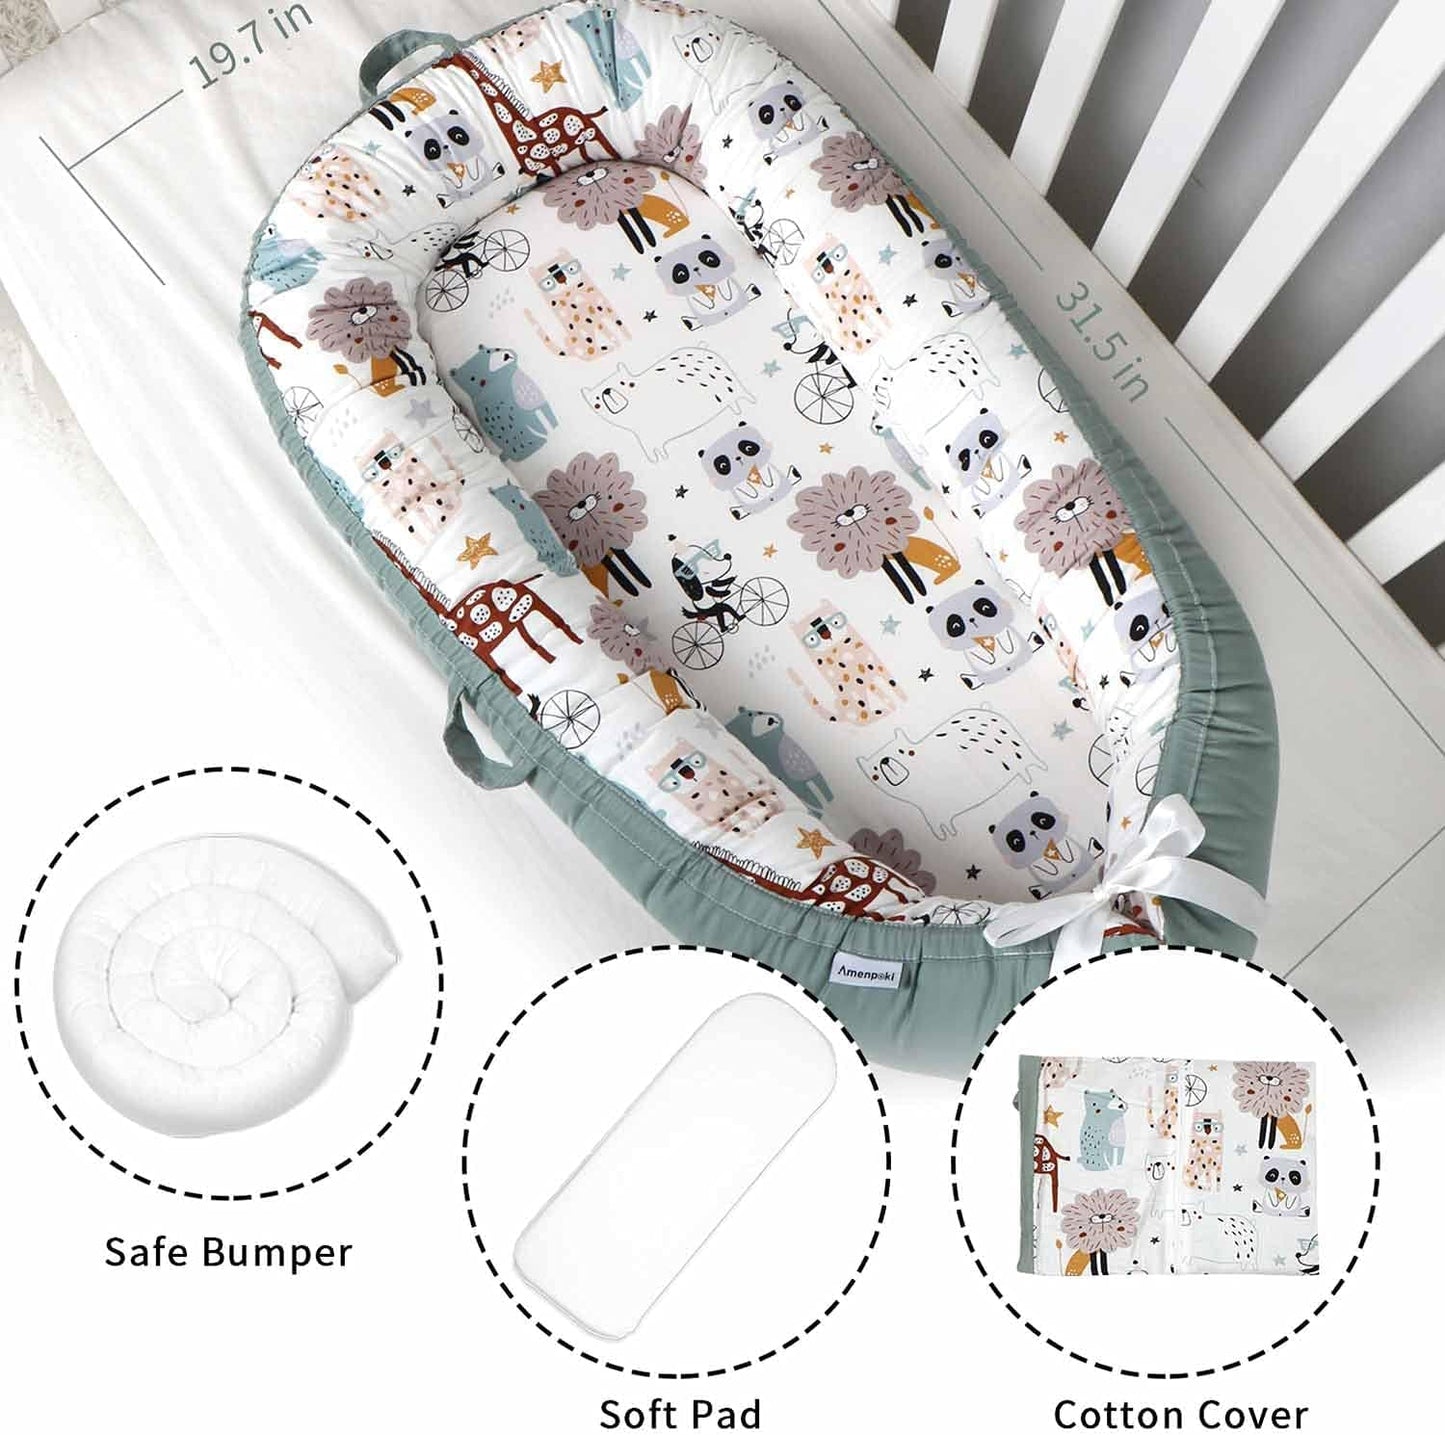 Beauenty Baby Lounger, Baby Nest for Sleeping, Ultra Soft and Breathable, Newborn Mattress for Crib & Bassinet, Baby Bionic Bed For Bedroom, Perfect for Traveling and Napping, Gift for Newborn (A)